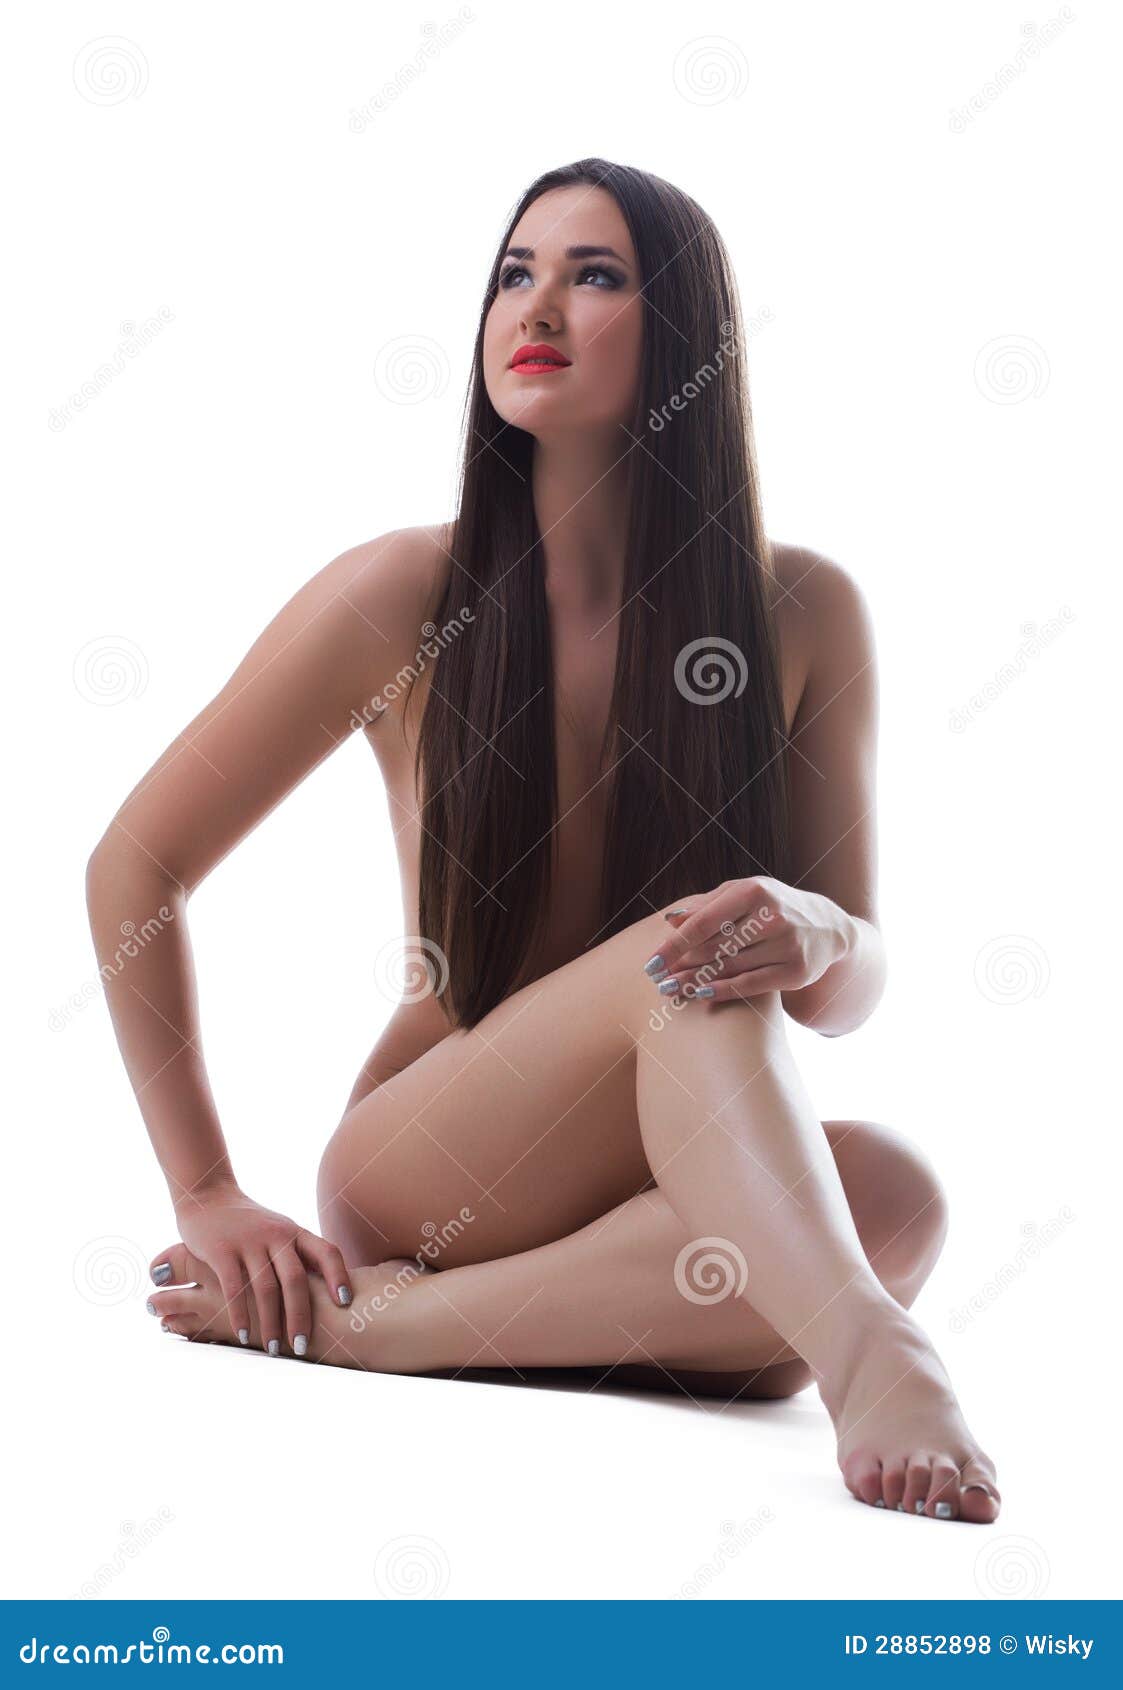 long Nude black hair with women